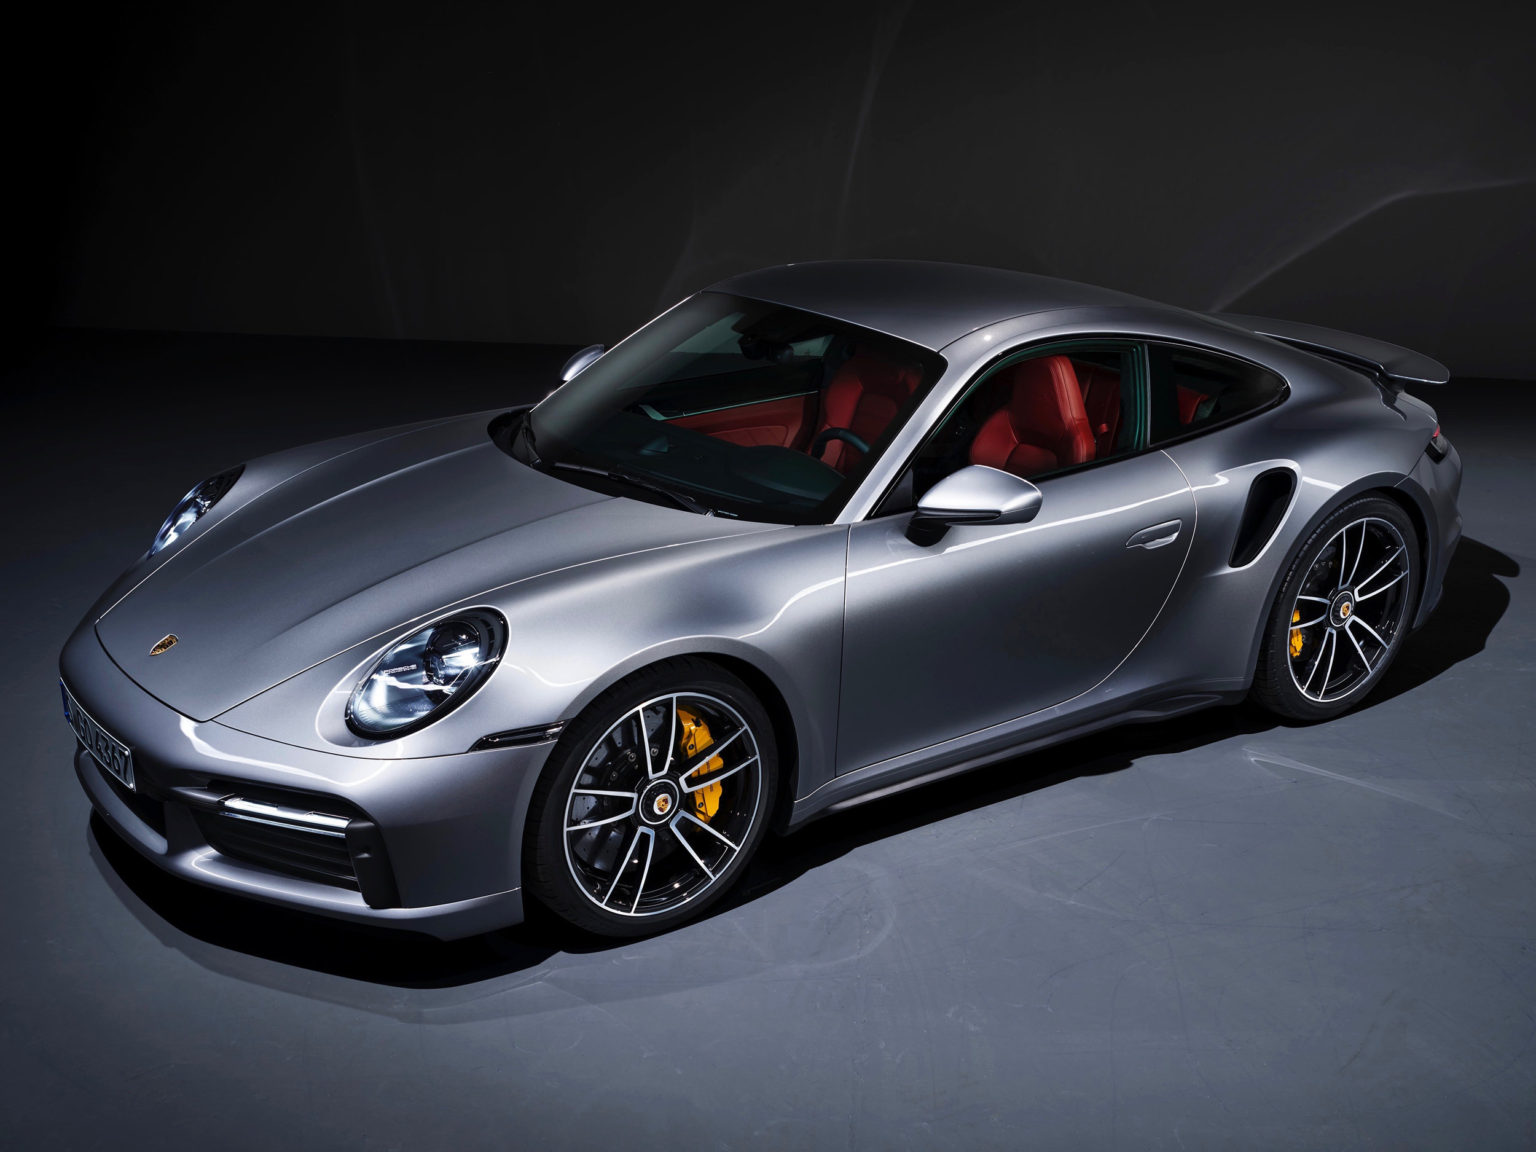 Porsche has debuted a new top-tier 911 model with the styling of the new 911 Carrera generation.